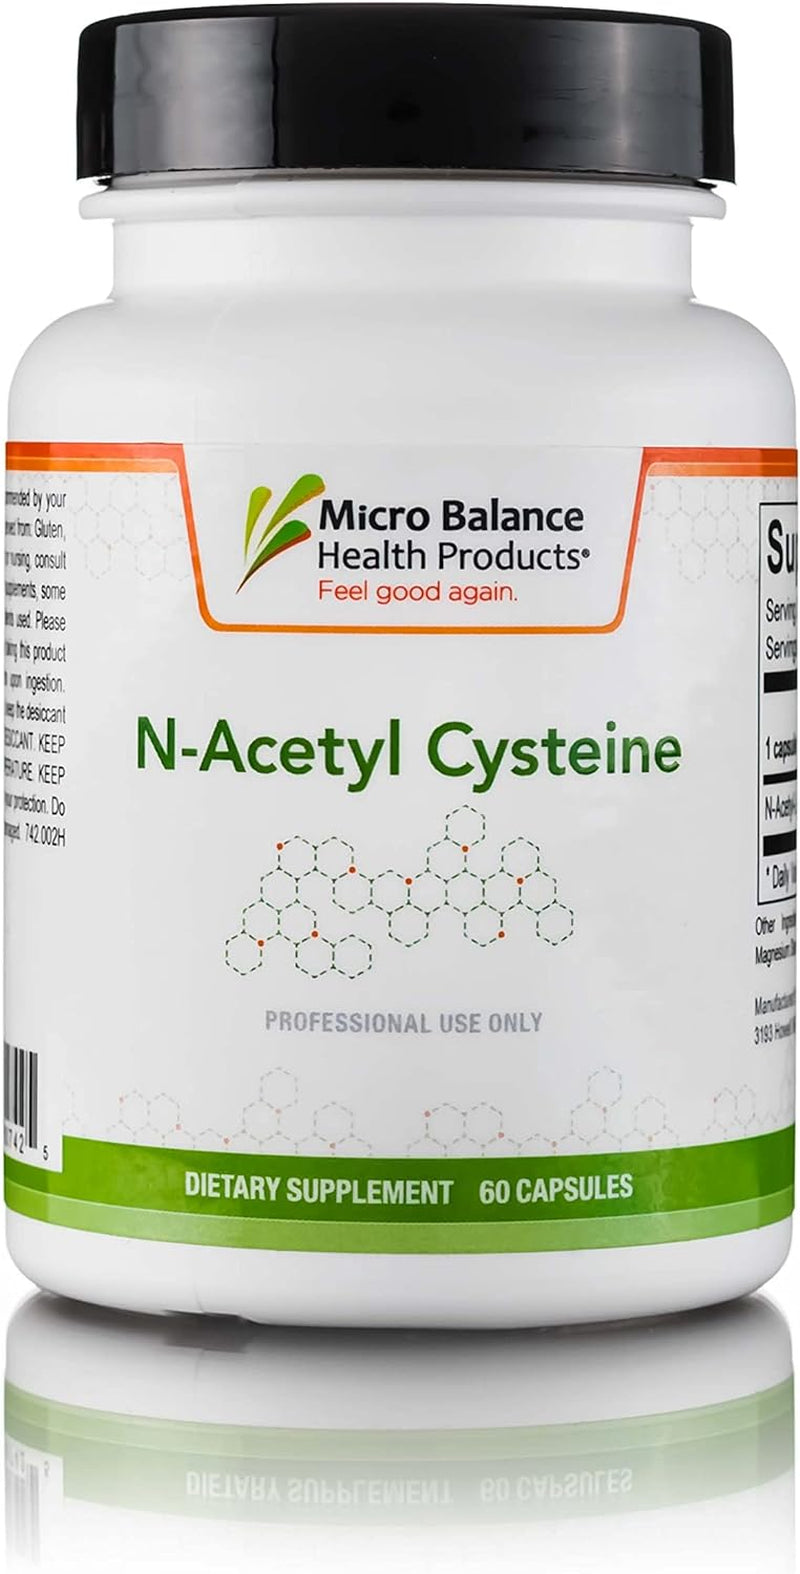 Micro Balance N-Acetyl Cysteine Amino Acid Supplement for Respiratory and Immune Support, Liver, and Antioxidants* | 60 Capsules